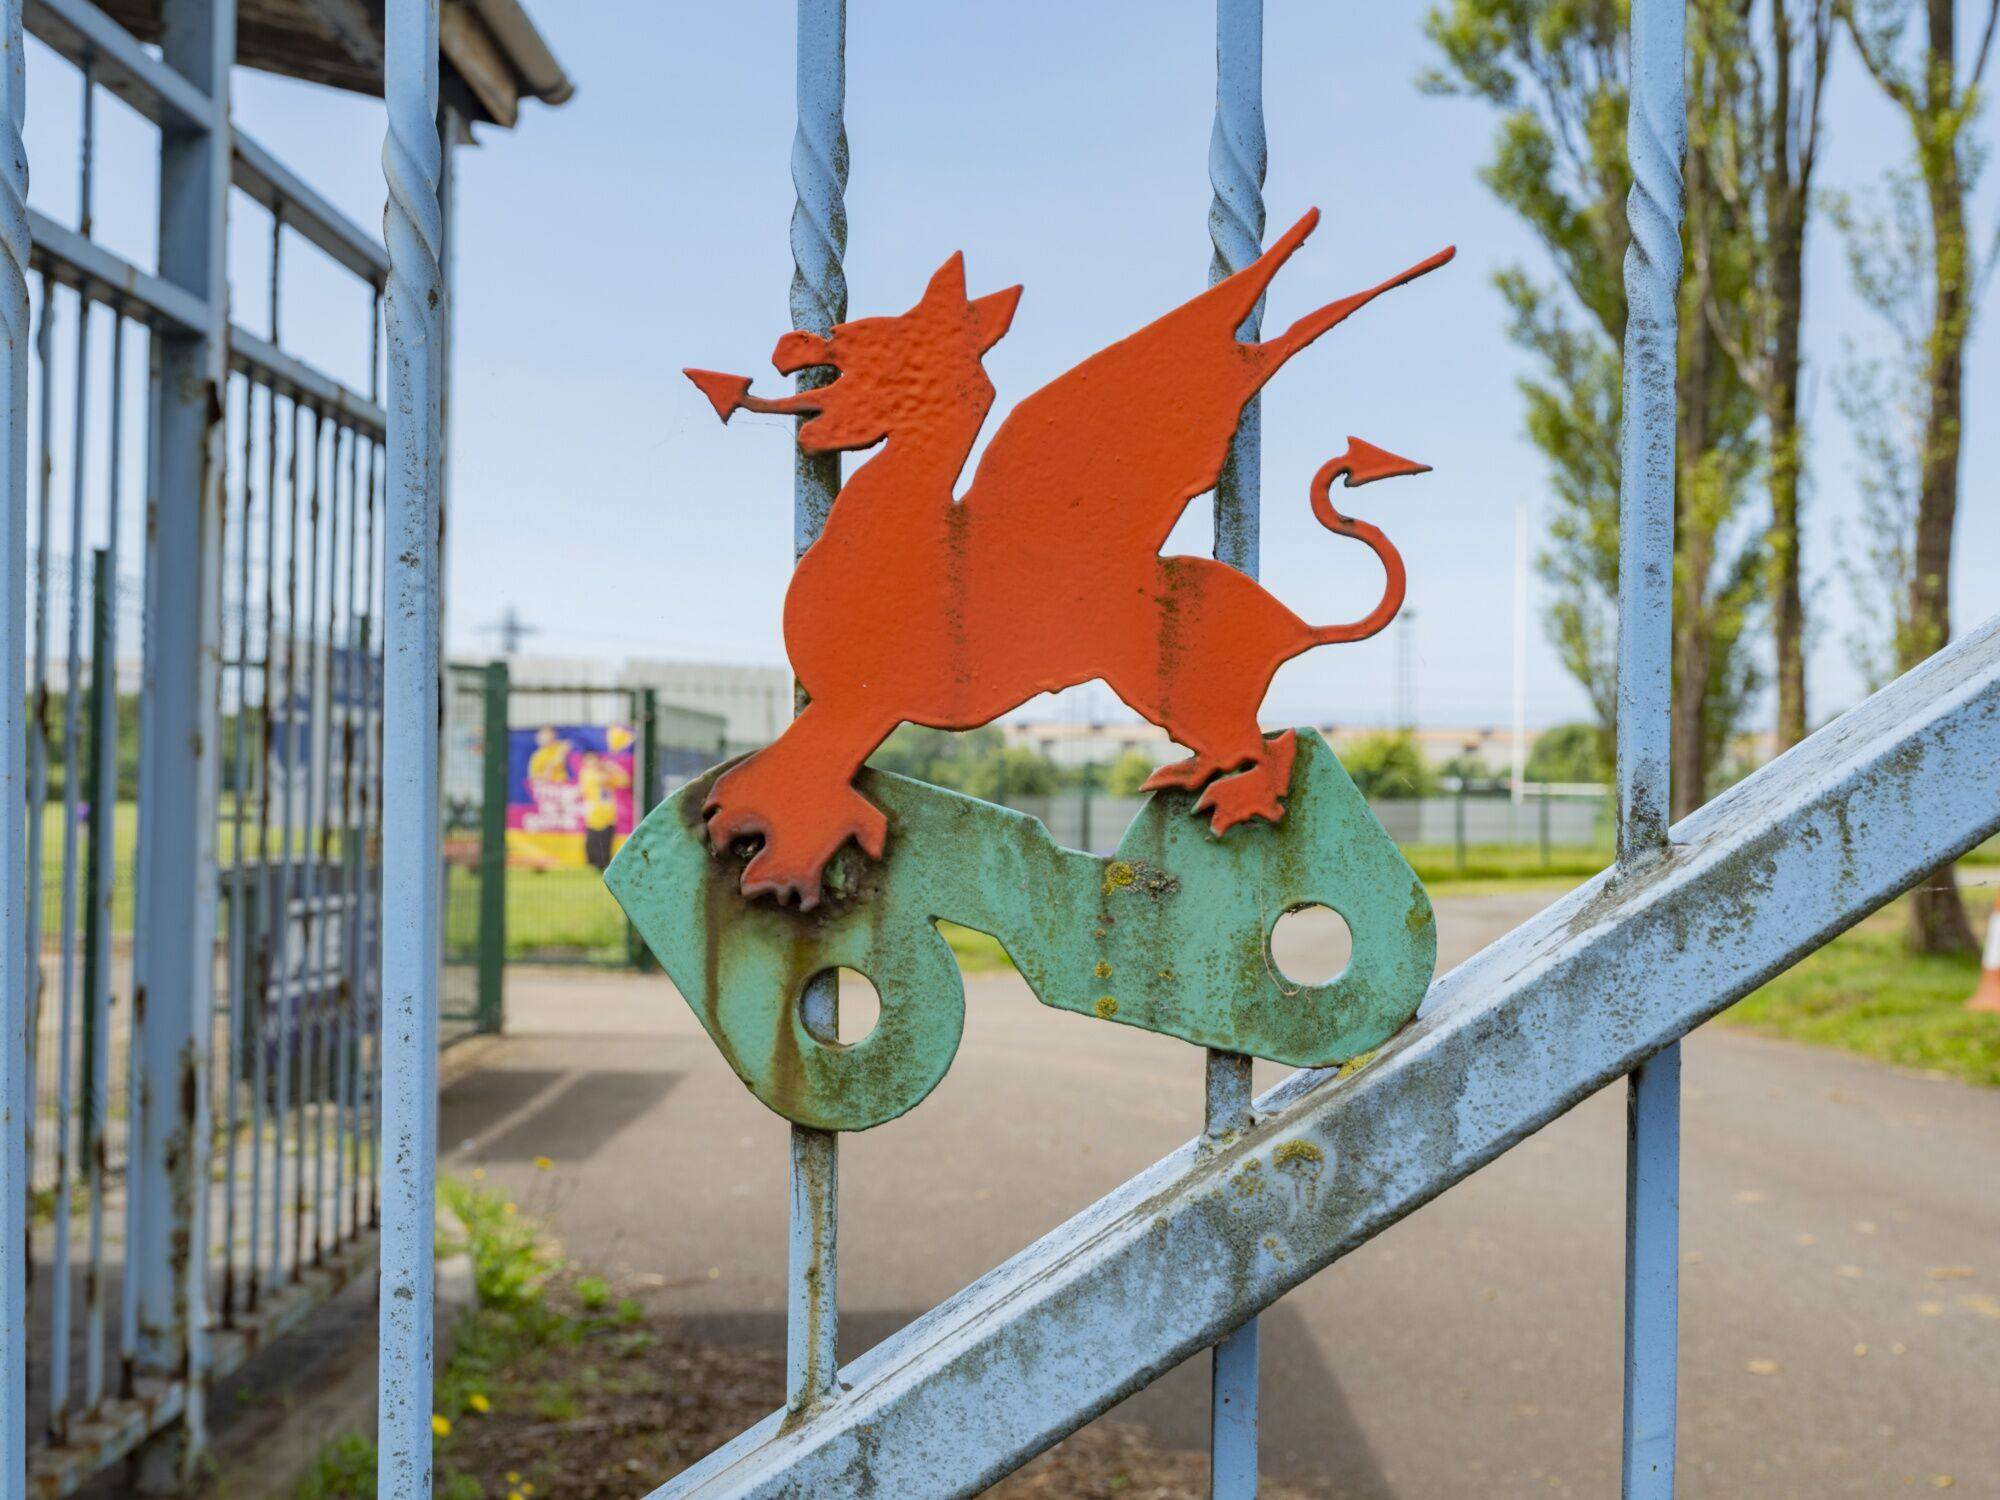 The Welsh dragon on the gates of the Tata Steel sports and social club in Port Talbot, Wales, UK. Photo: Bloomberg